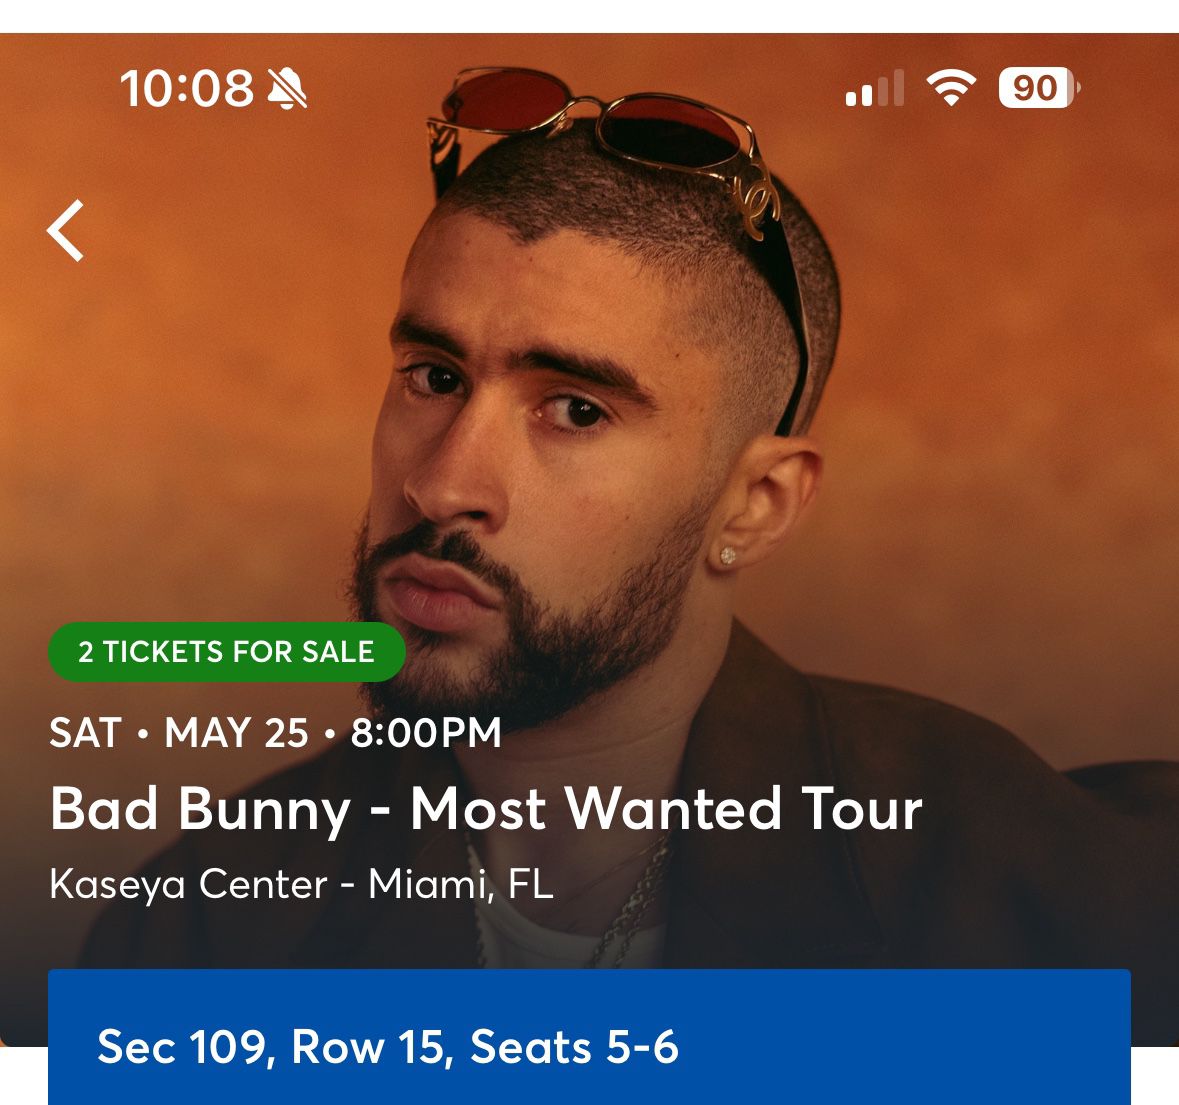 2 Bad bunny Tickets Friday 5/24 Section 111 & Saturday 5/25 Section 109